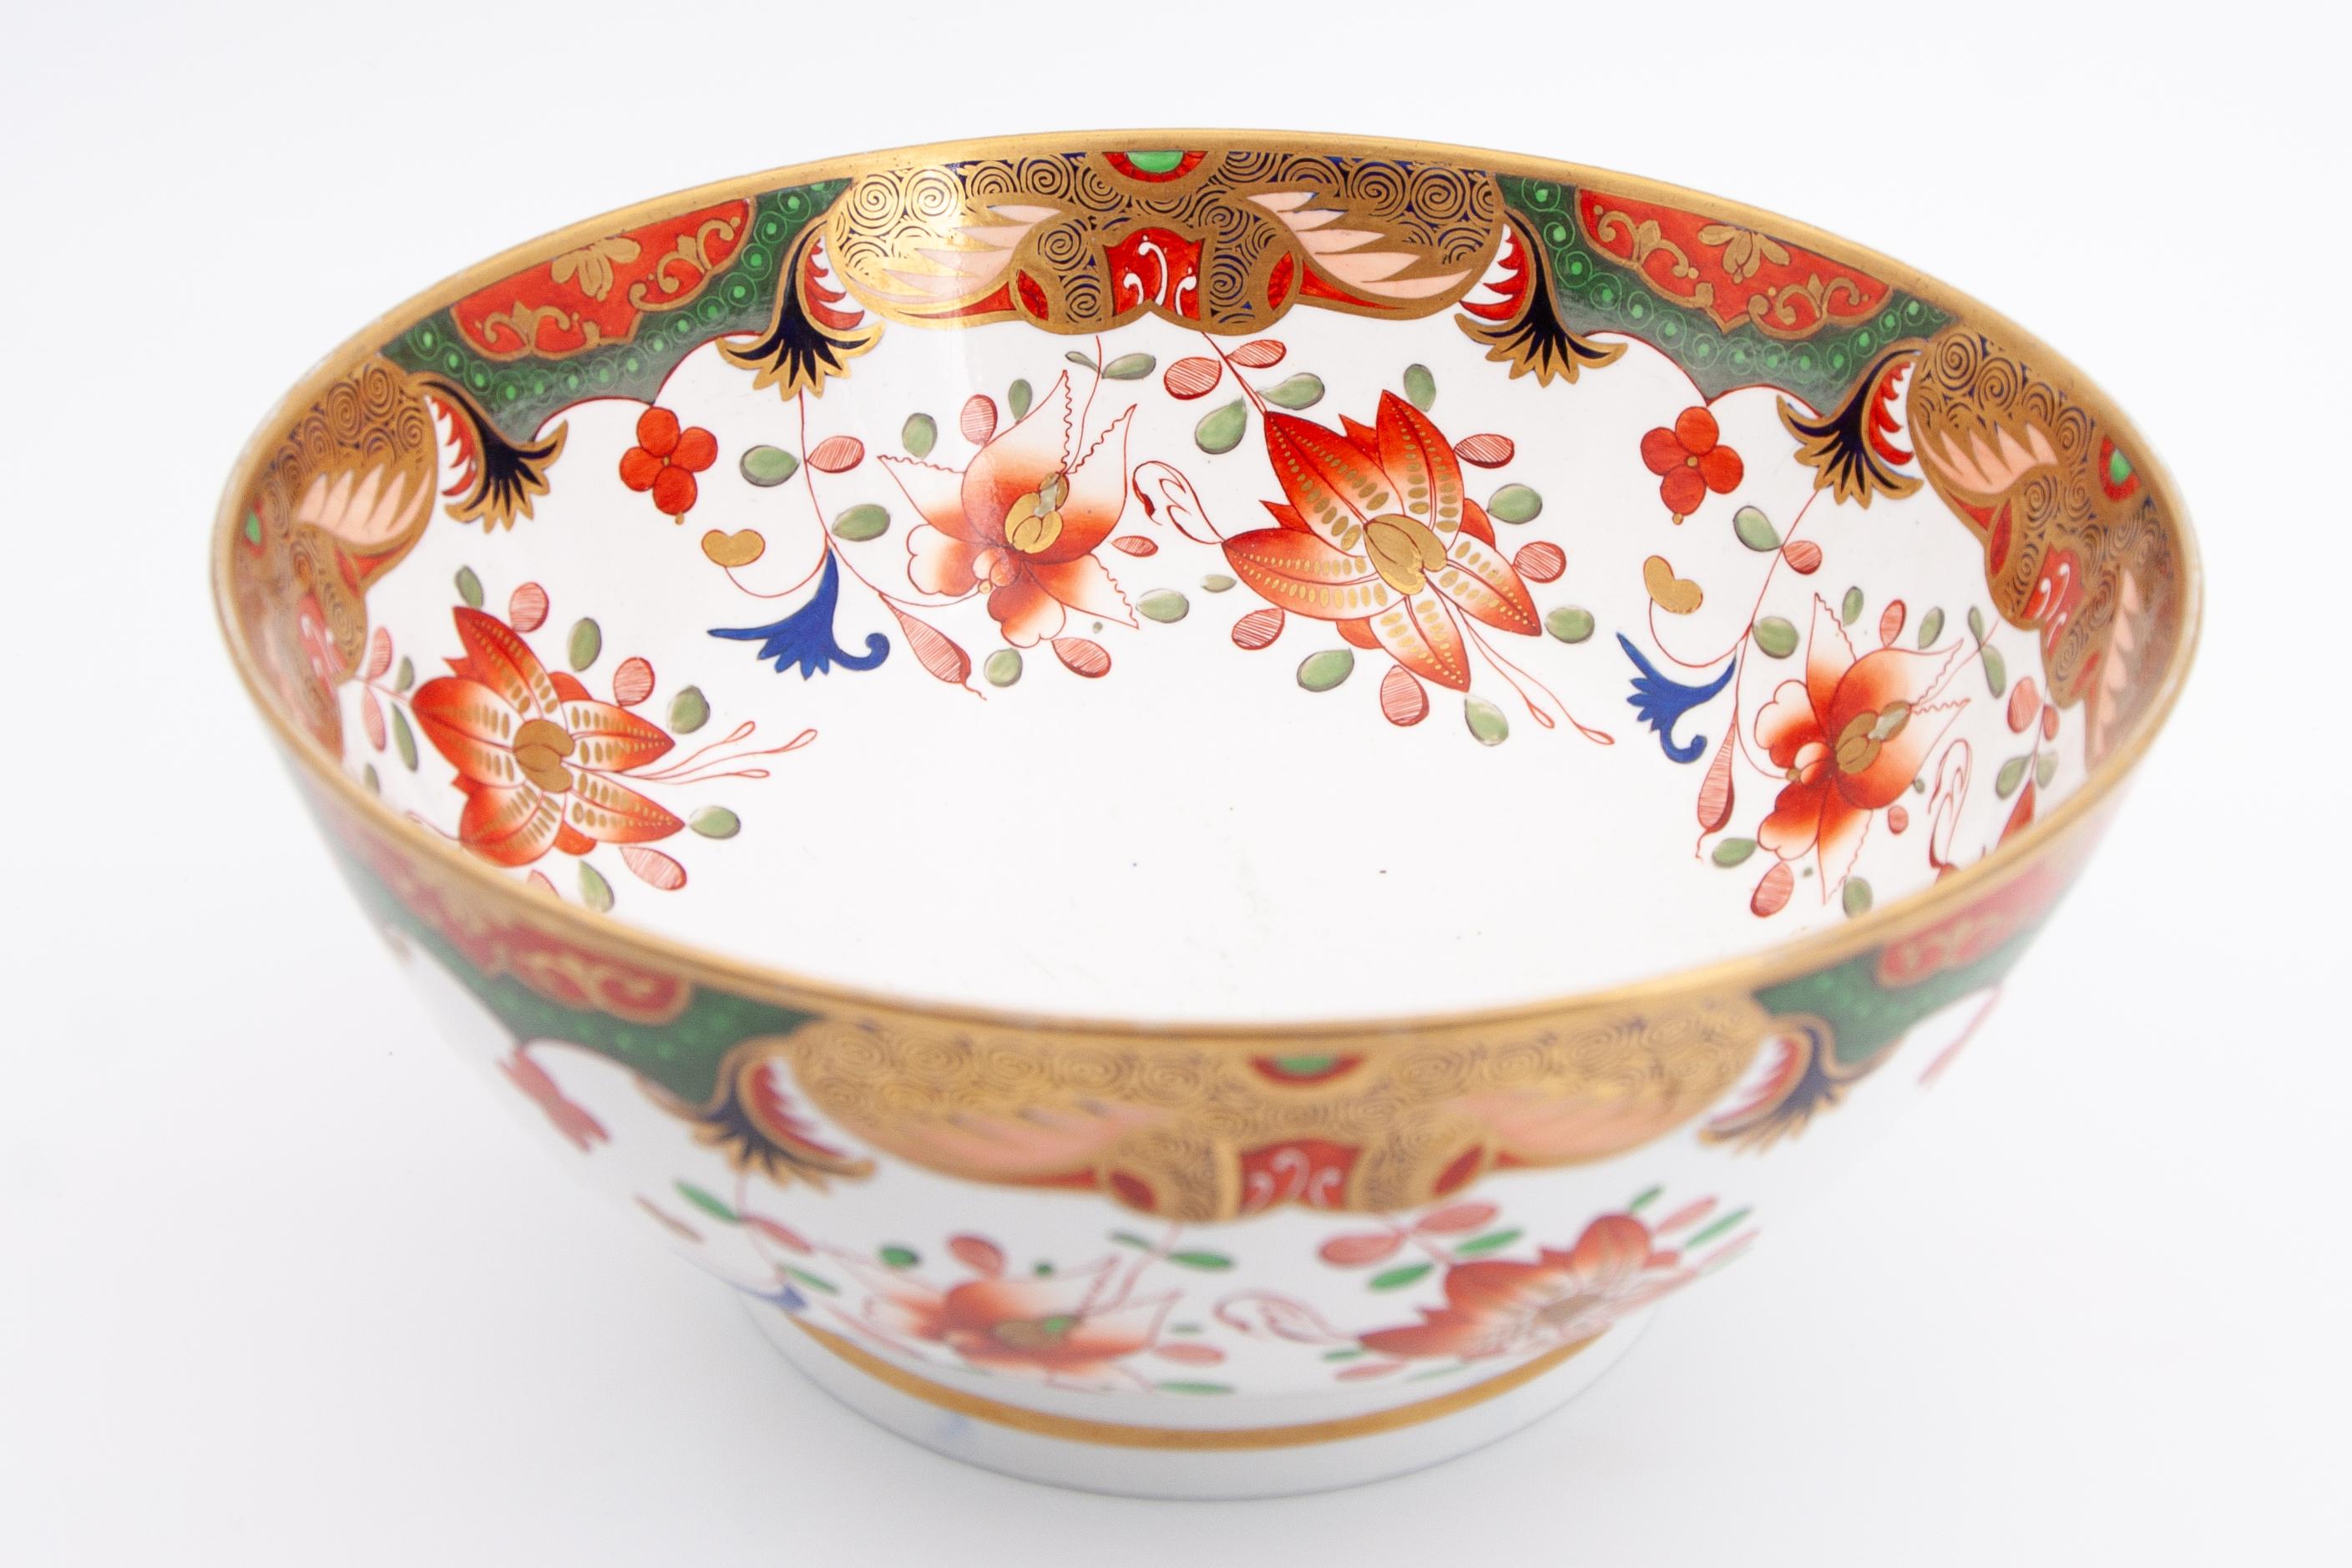 Hand-Painted Early 19th Century Spode Porcelain Regency Punch Bowl